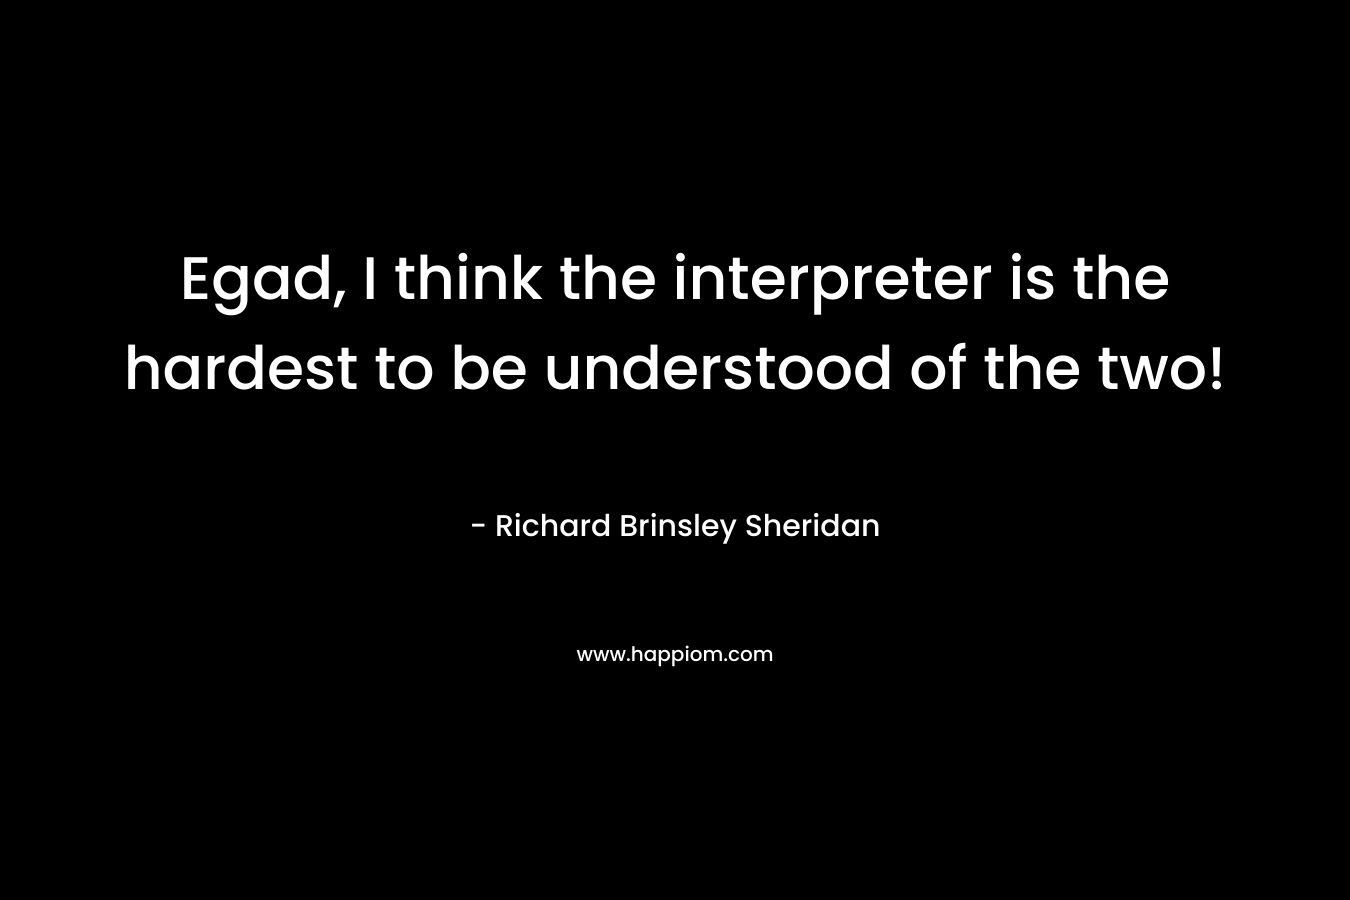 Egad, I think the interpreter is the hardest to be understood of the two! – Richard Brinsley Sheridan